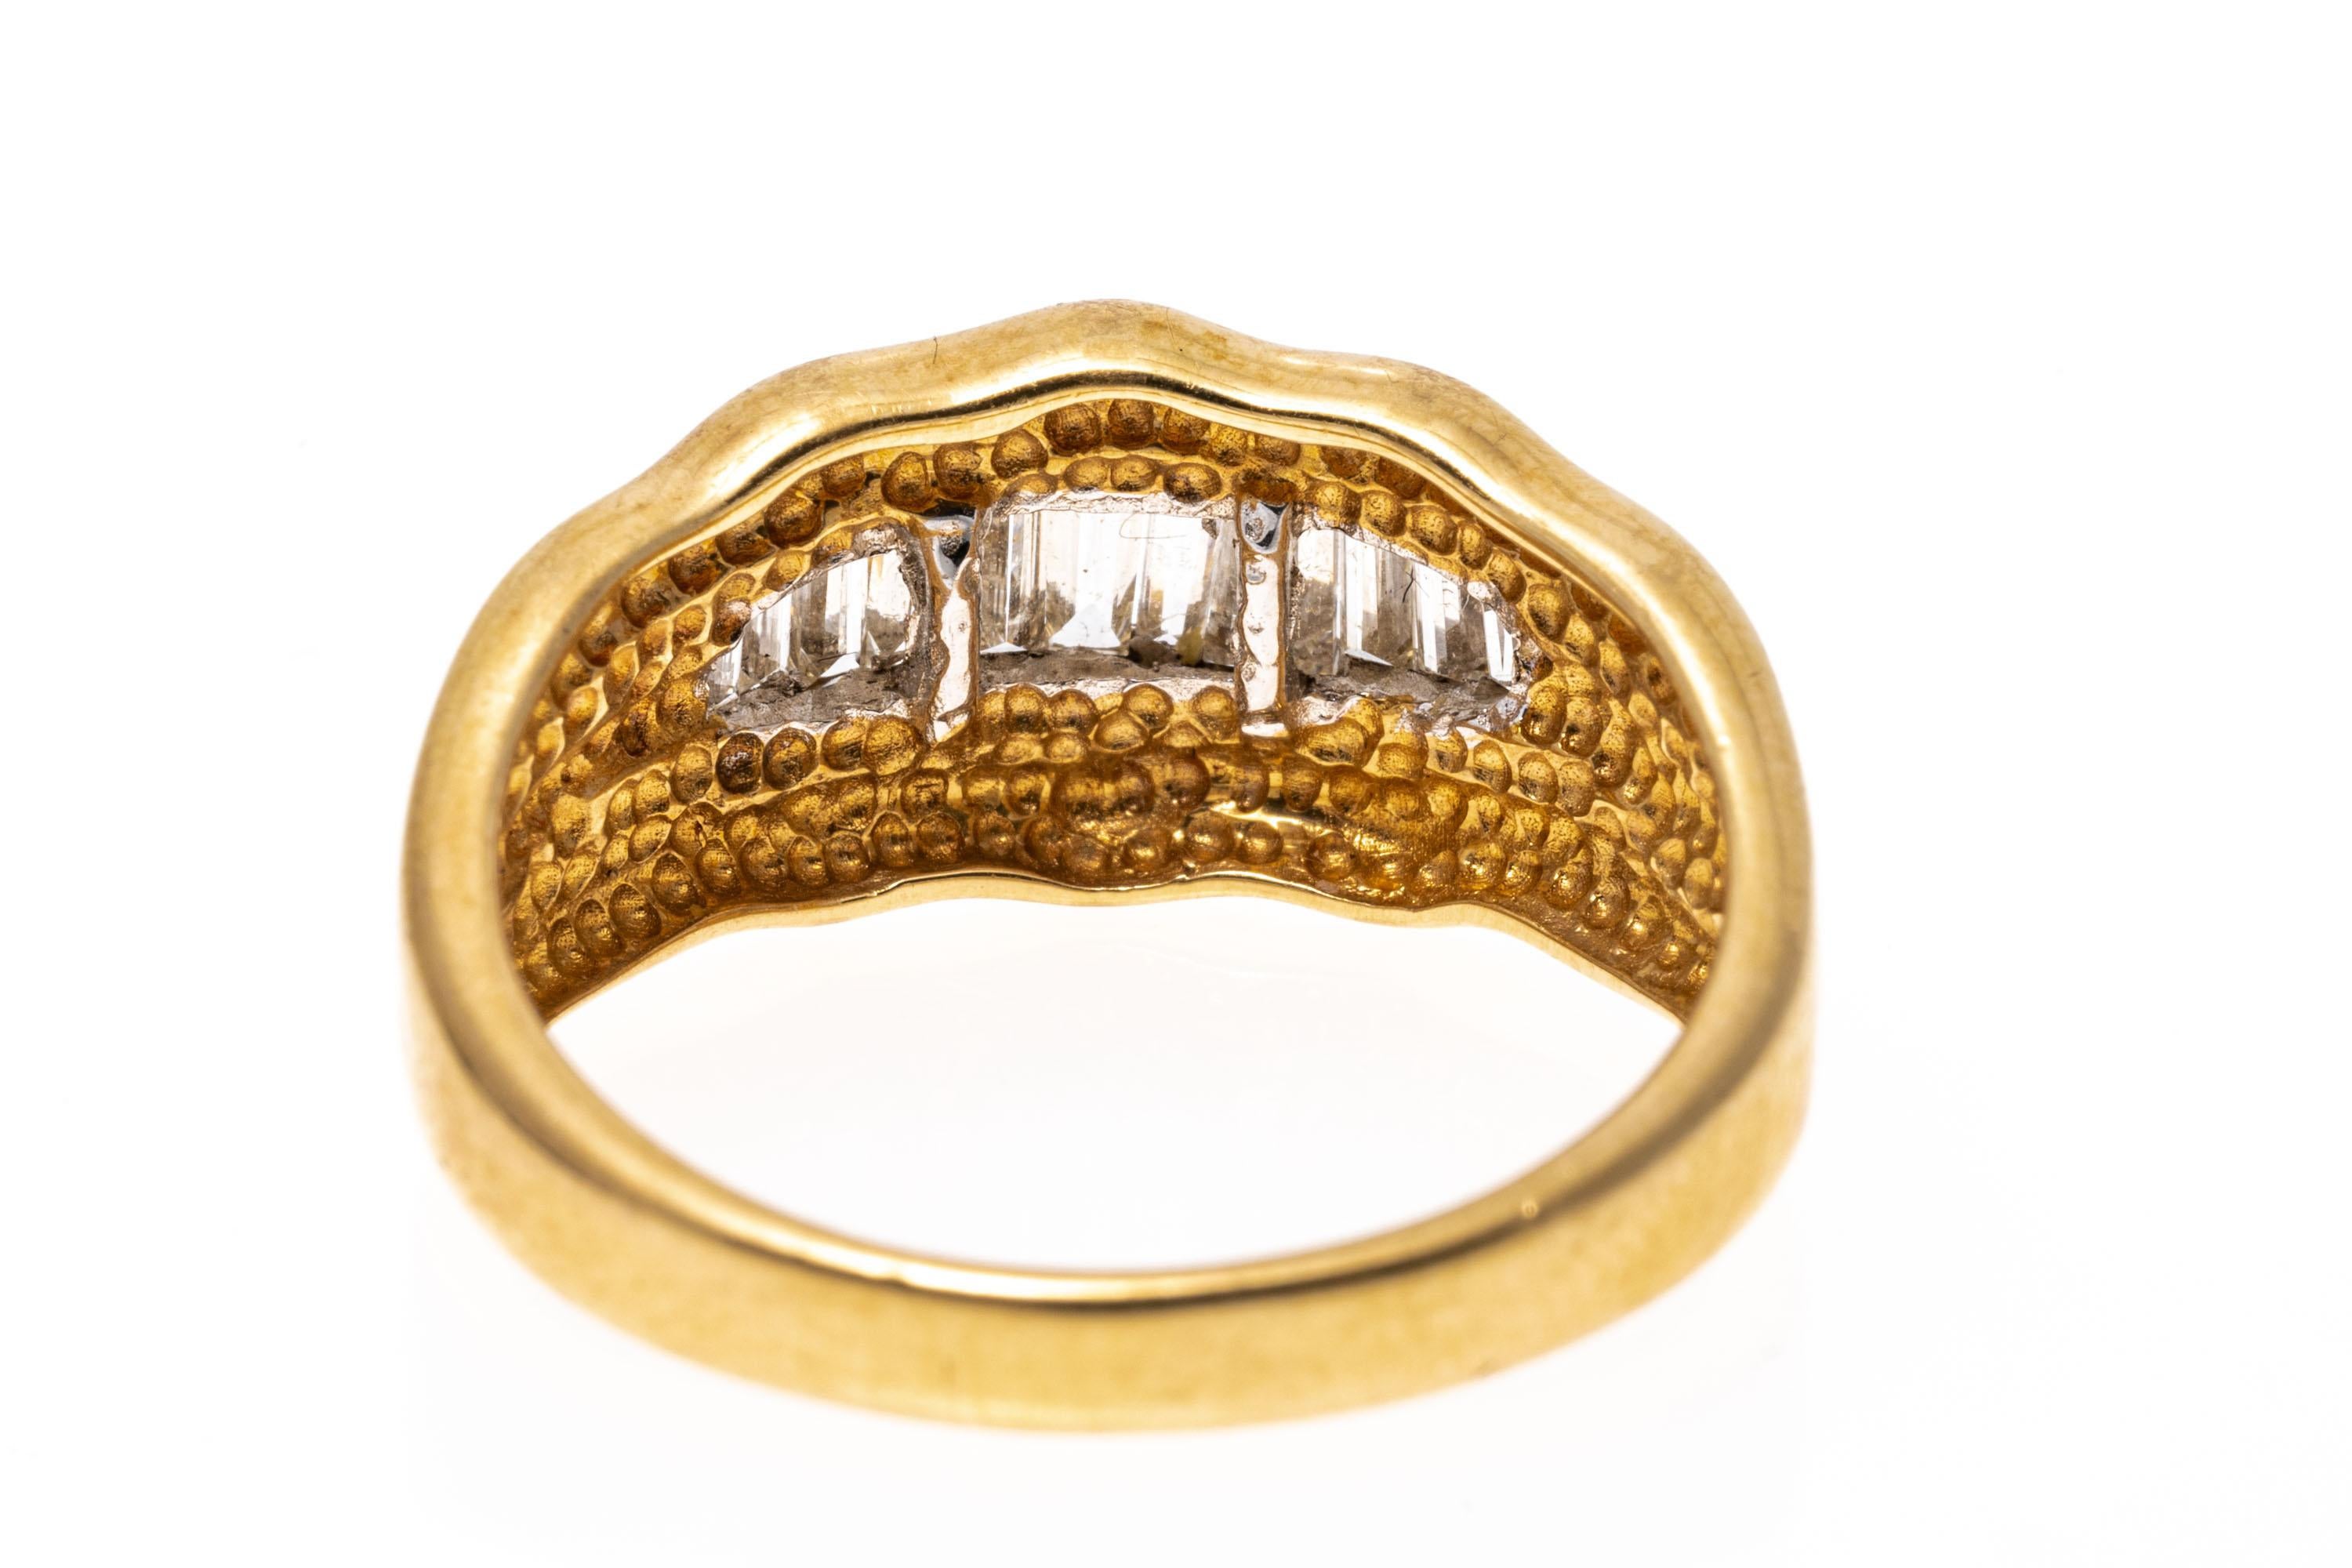 Contemporary 14k Yellow Gold Graduated Baguette Diamond Ring With Scalloped Edge For Sale